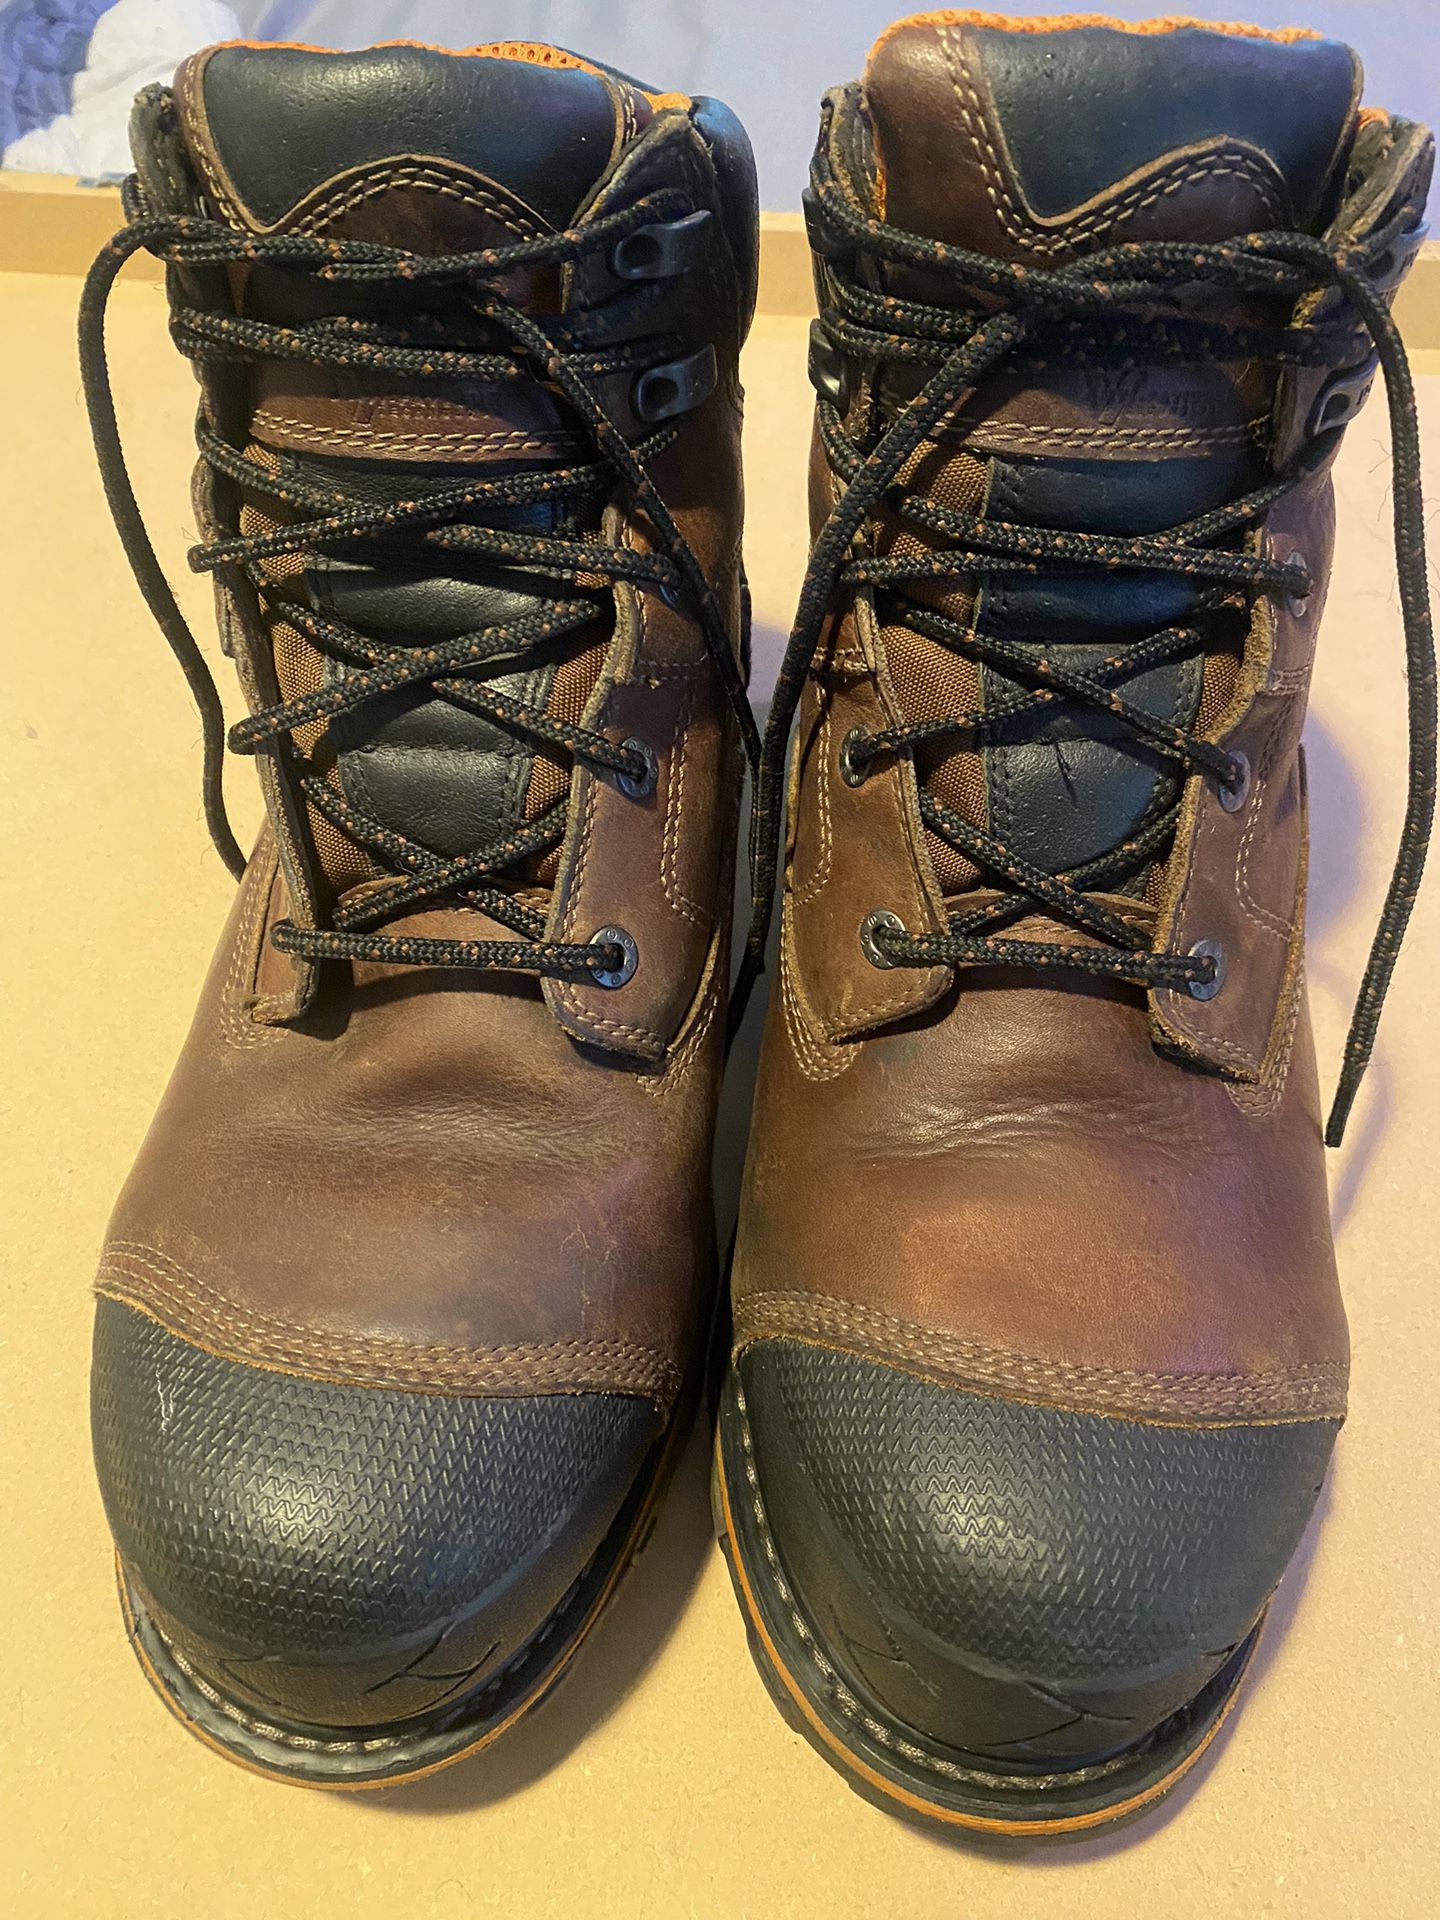 Timberland Composite Toe Work Boots Size 12m Make Me An Offer!